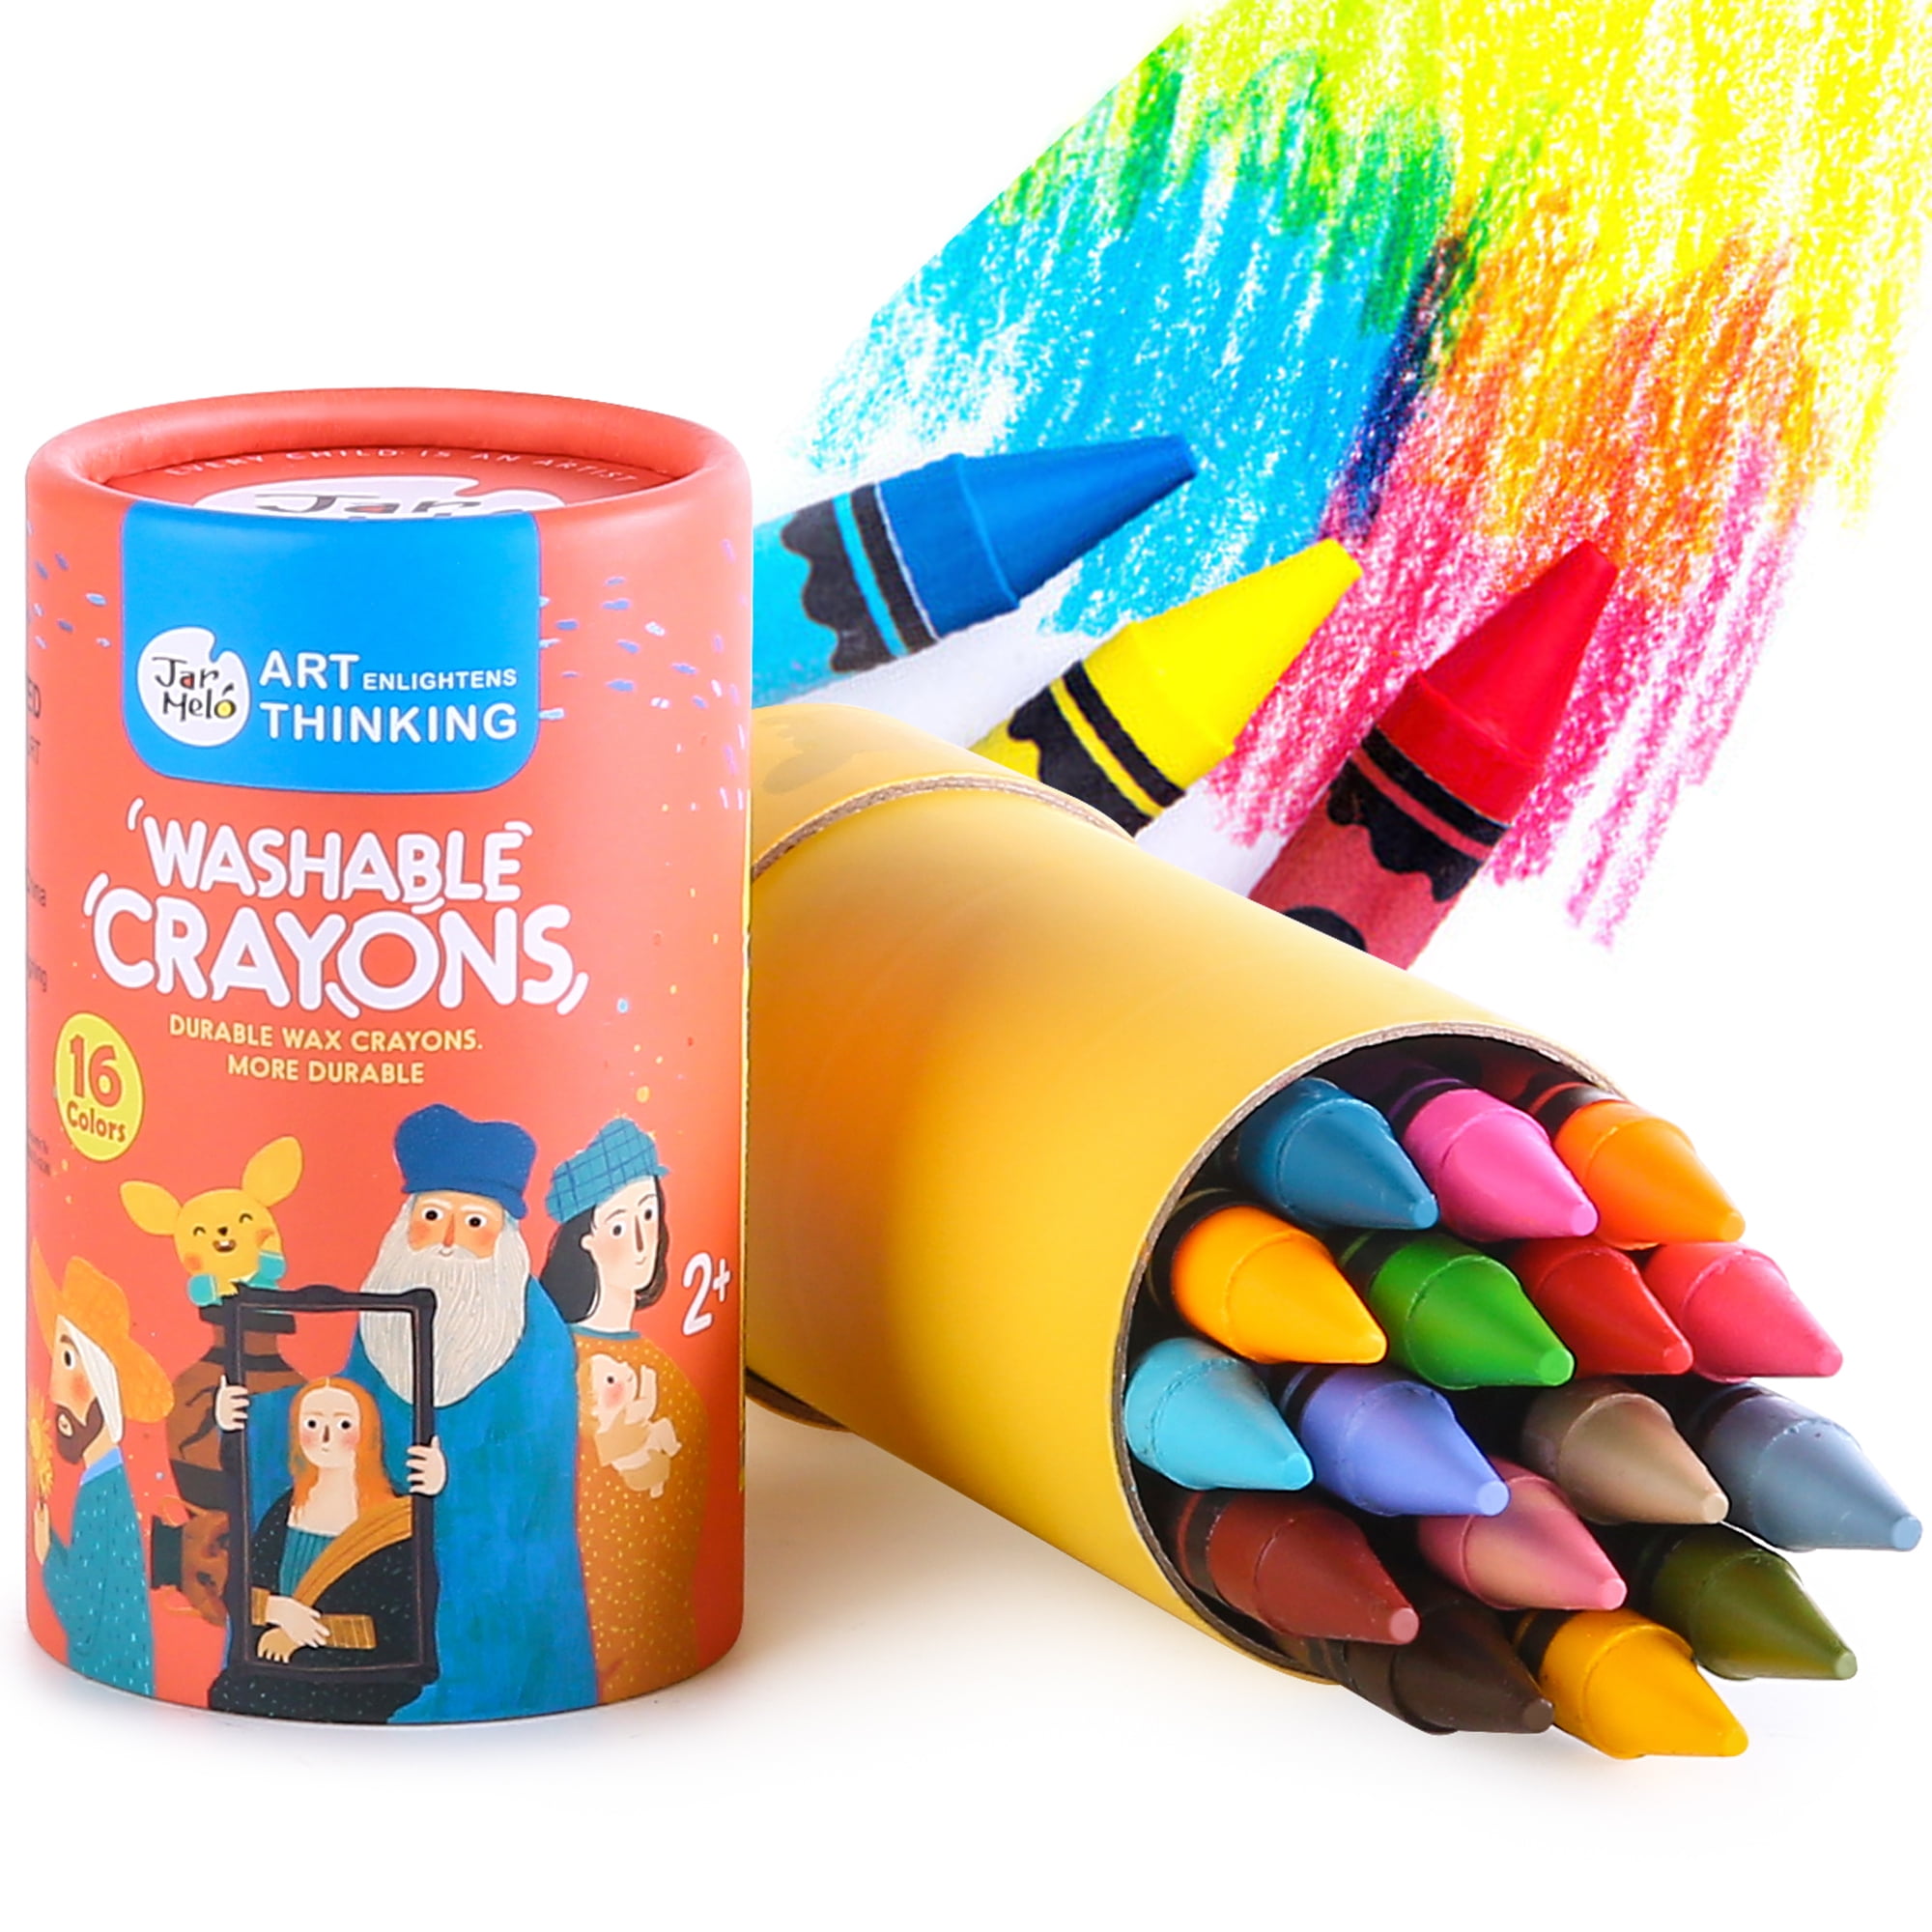  Jar Melo Jumbo Crayons for Toddlers, 6 Colors Twistable Crayons  with 108 PDF Coloring Pages, Non Toxic Washable Crayons Silky Large Big  Baby Crayons, Ideal Art Supplies Christmas Gifts for Boys